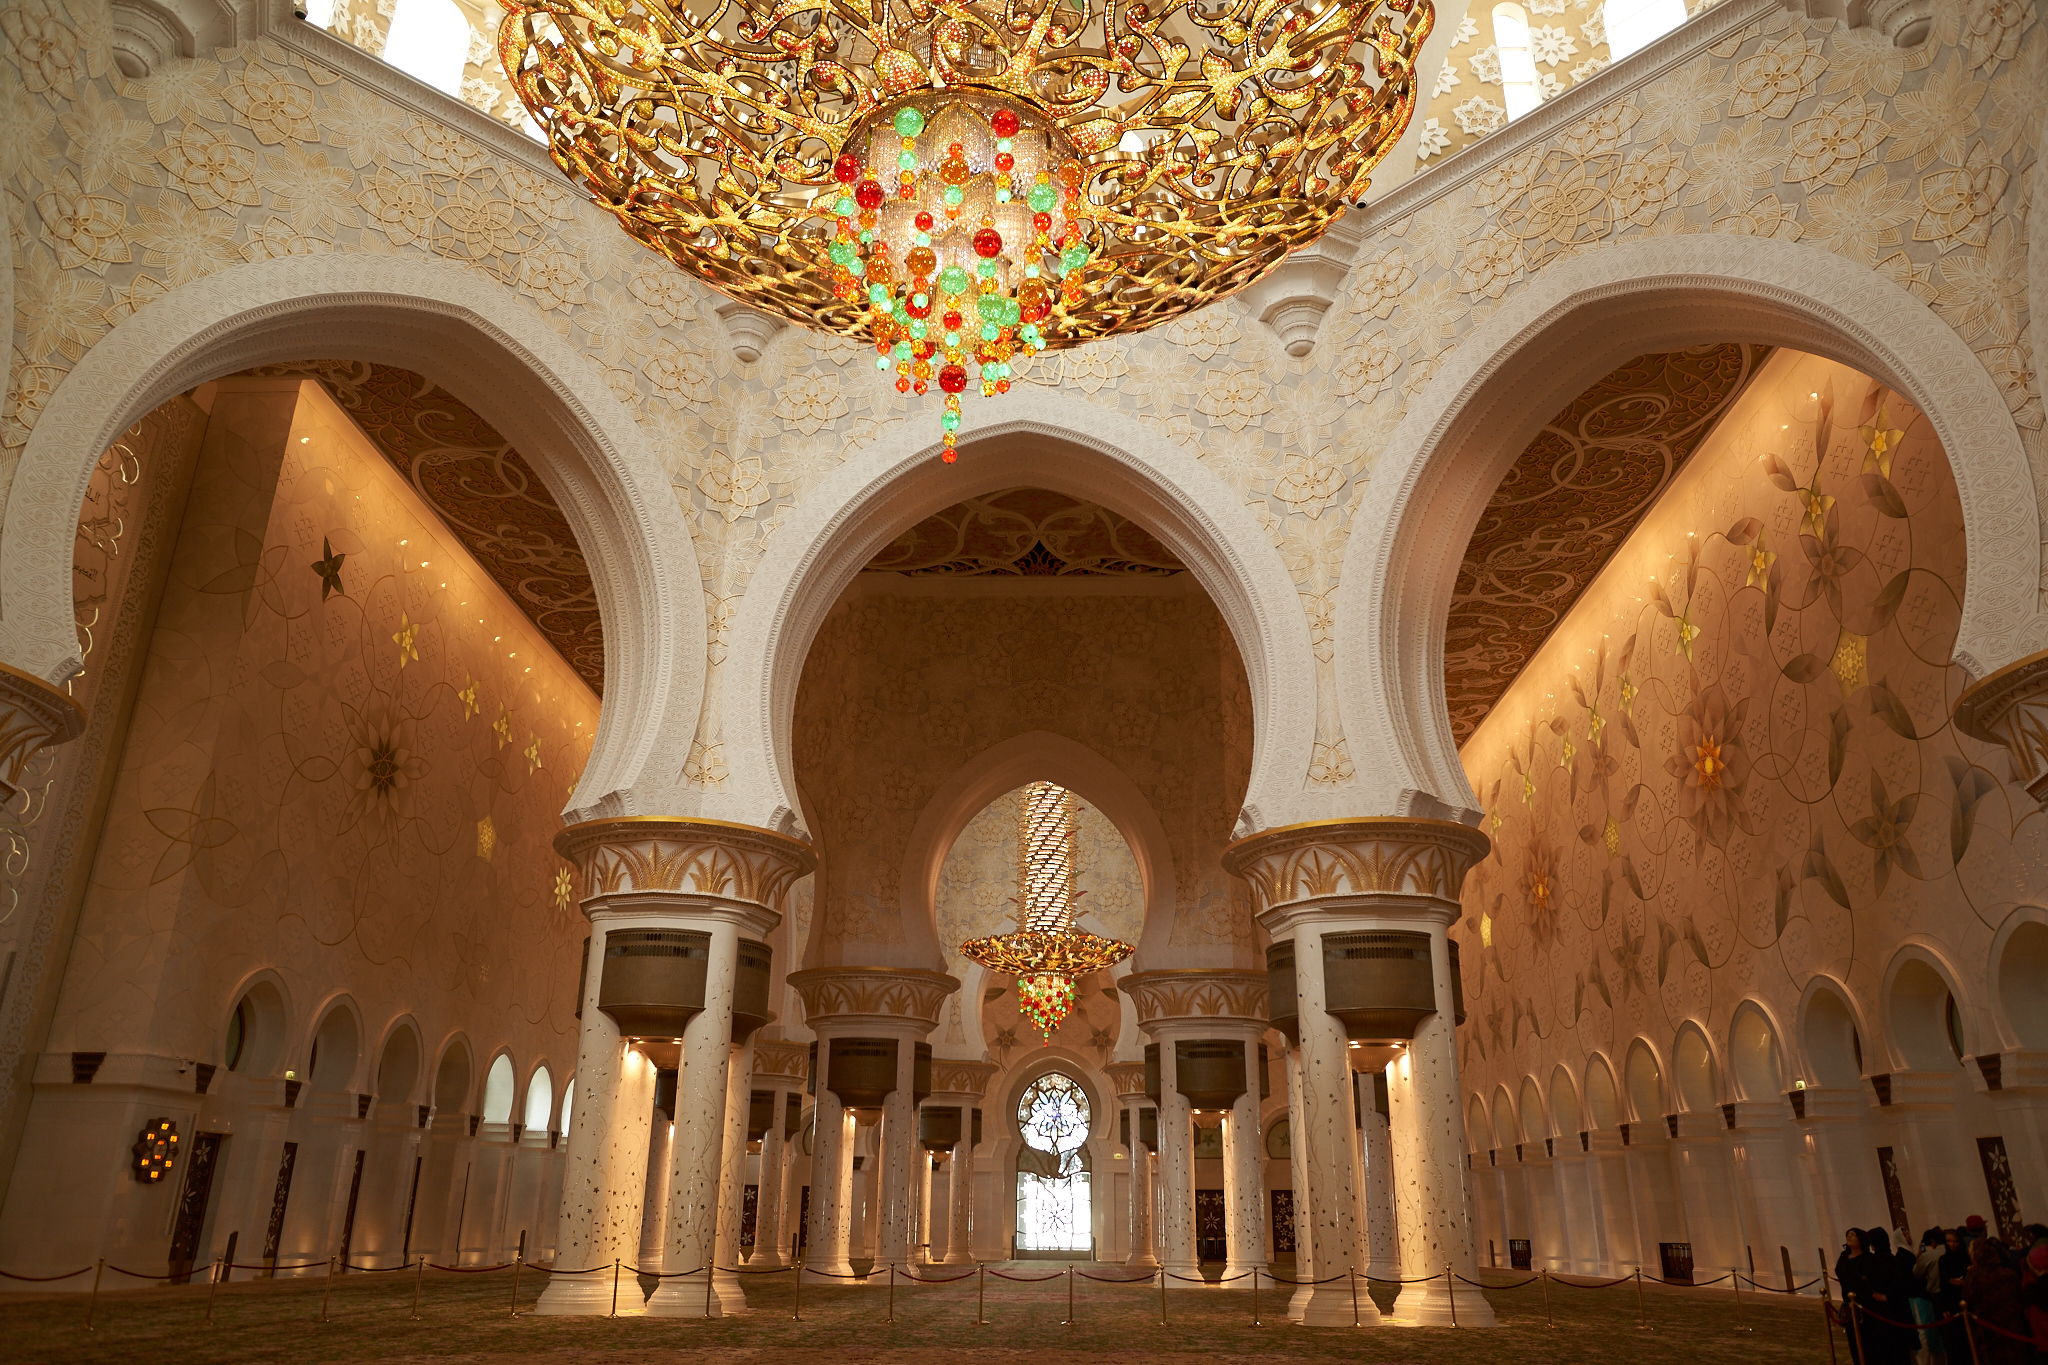 Interiors of the Grand Mosque